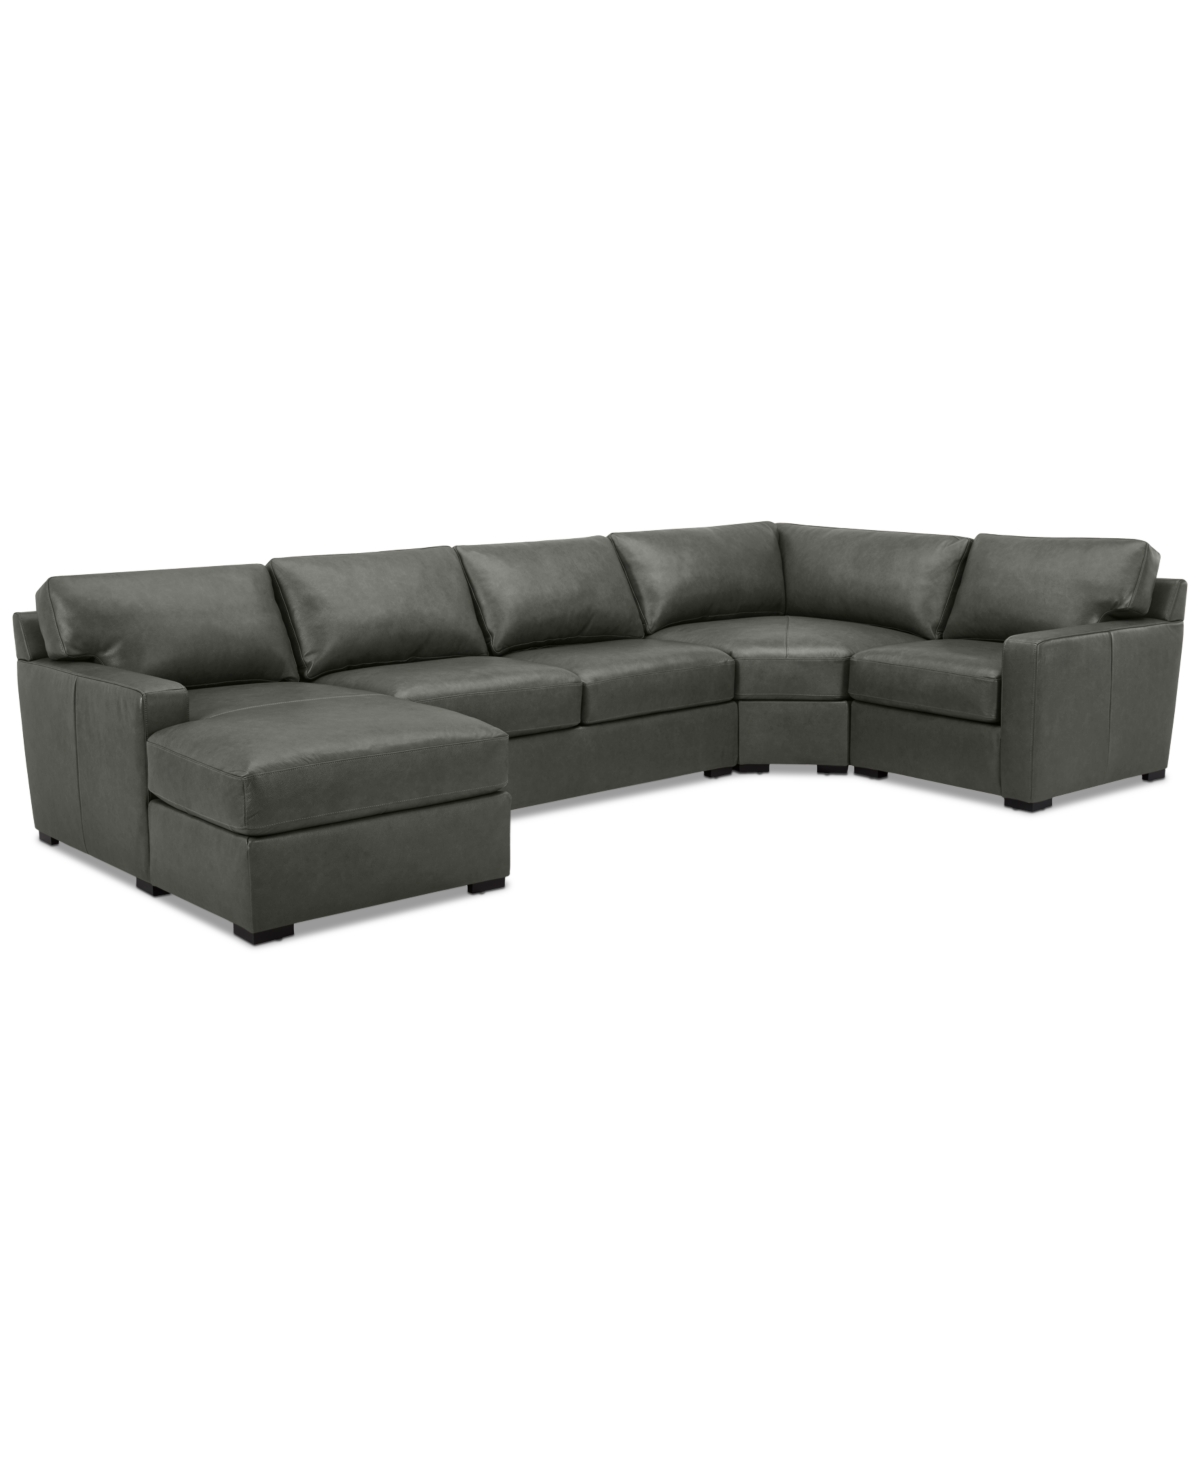 Macy's Radley 148" 4-pc. Leather Wedge Modular Chaise Sectional, Created For  In Green